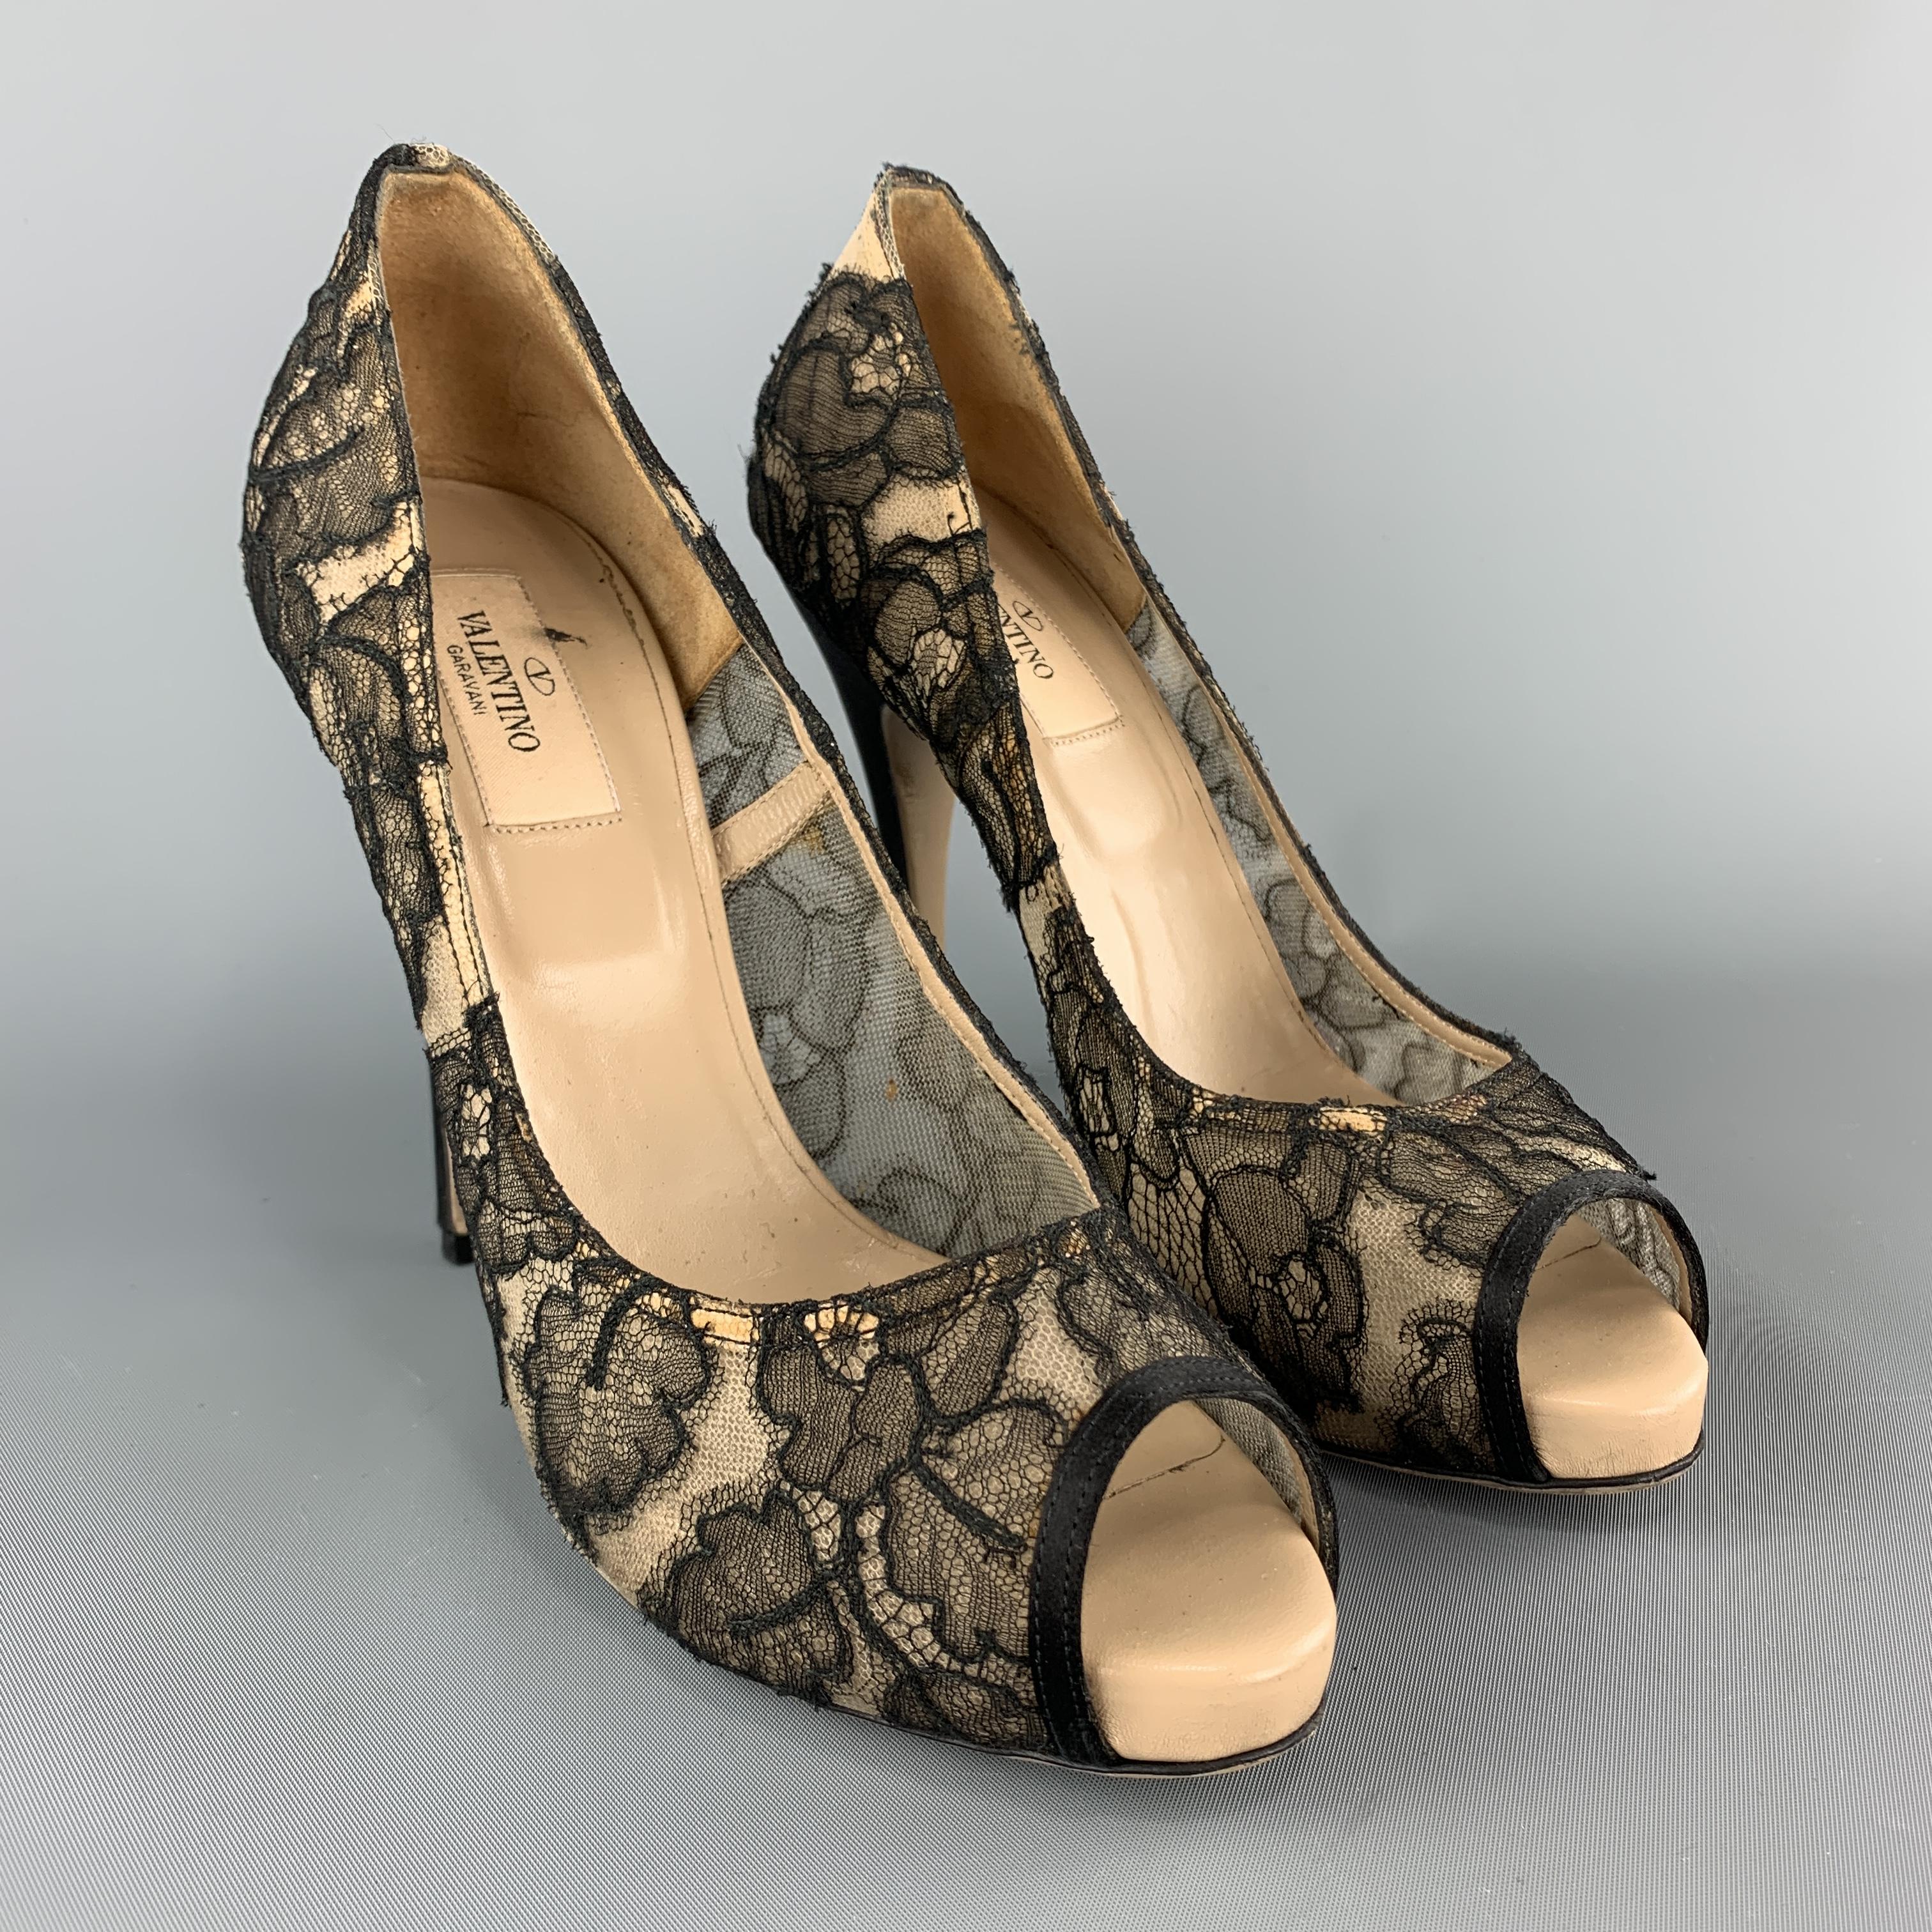 VALENTINO pumps come in black lace with beige tulle lining, beige leather insole, and black satin stiletto heel. Made in Italy.

Excellent Pre-Owned Condition.
Marked: IT 38.5

Heel: 4.75 in.
Platform: 0.75 in.